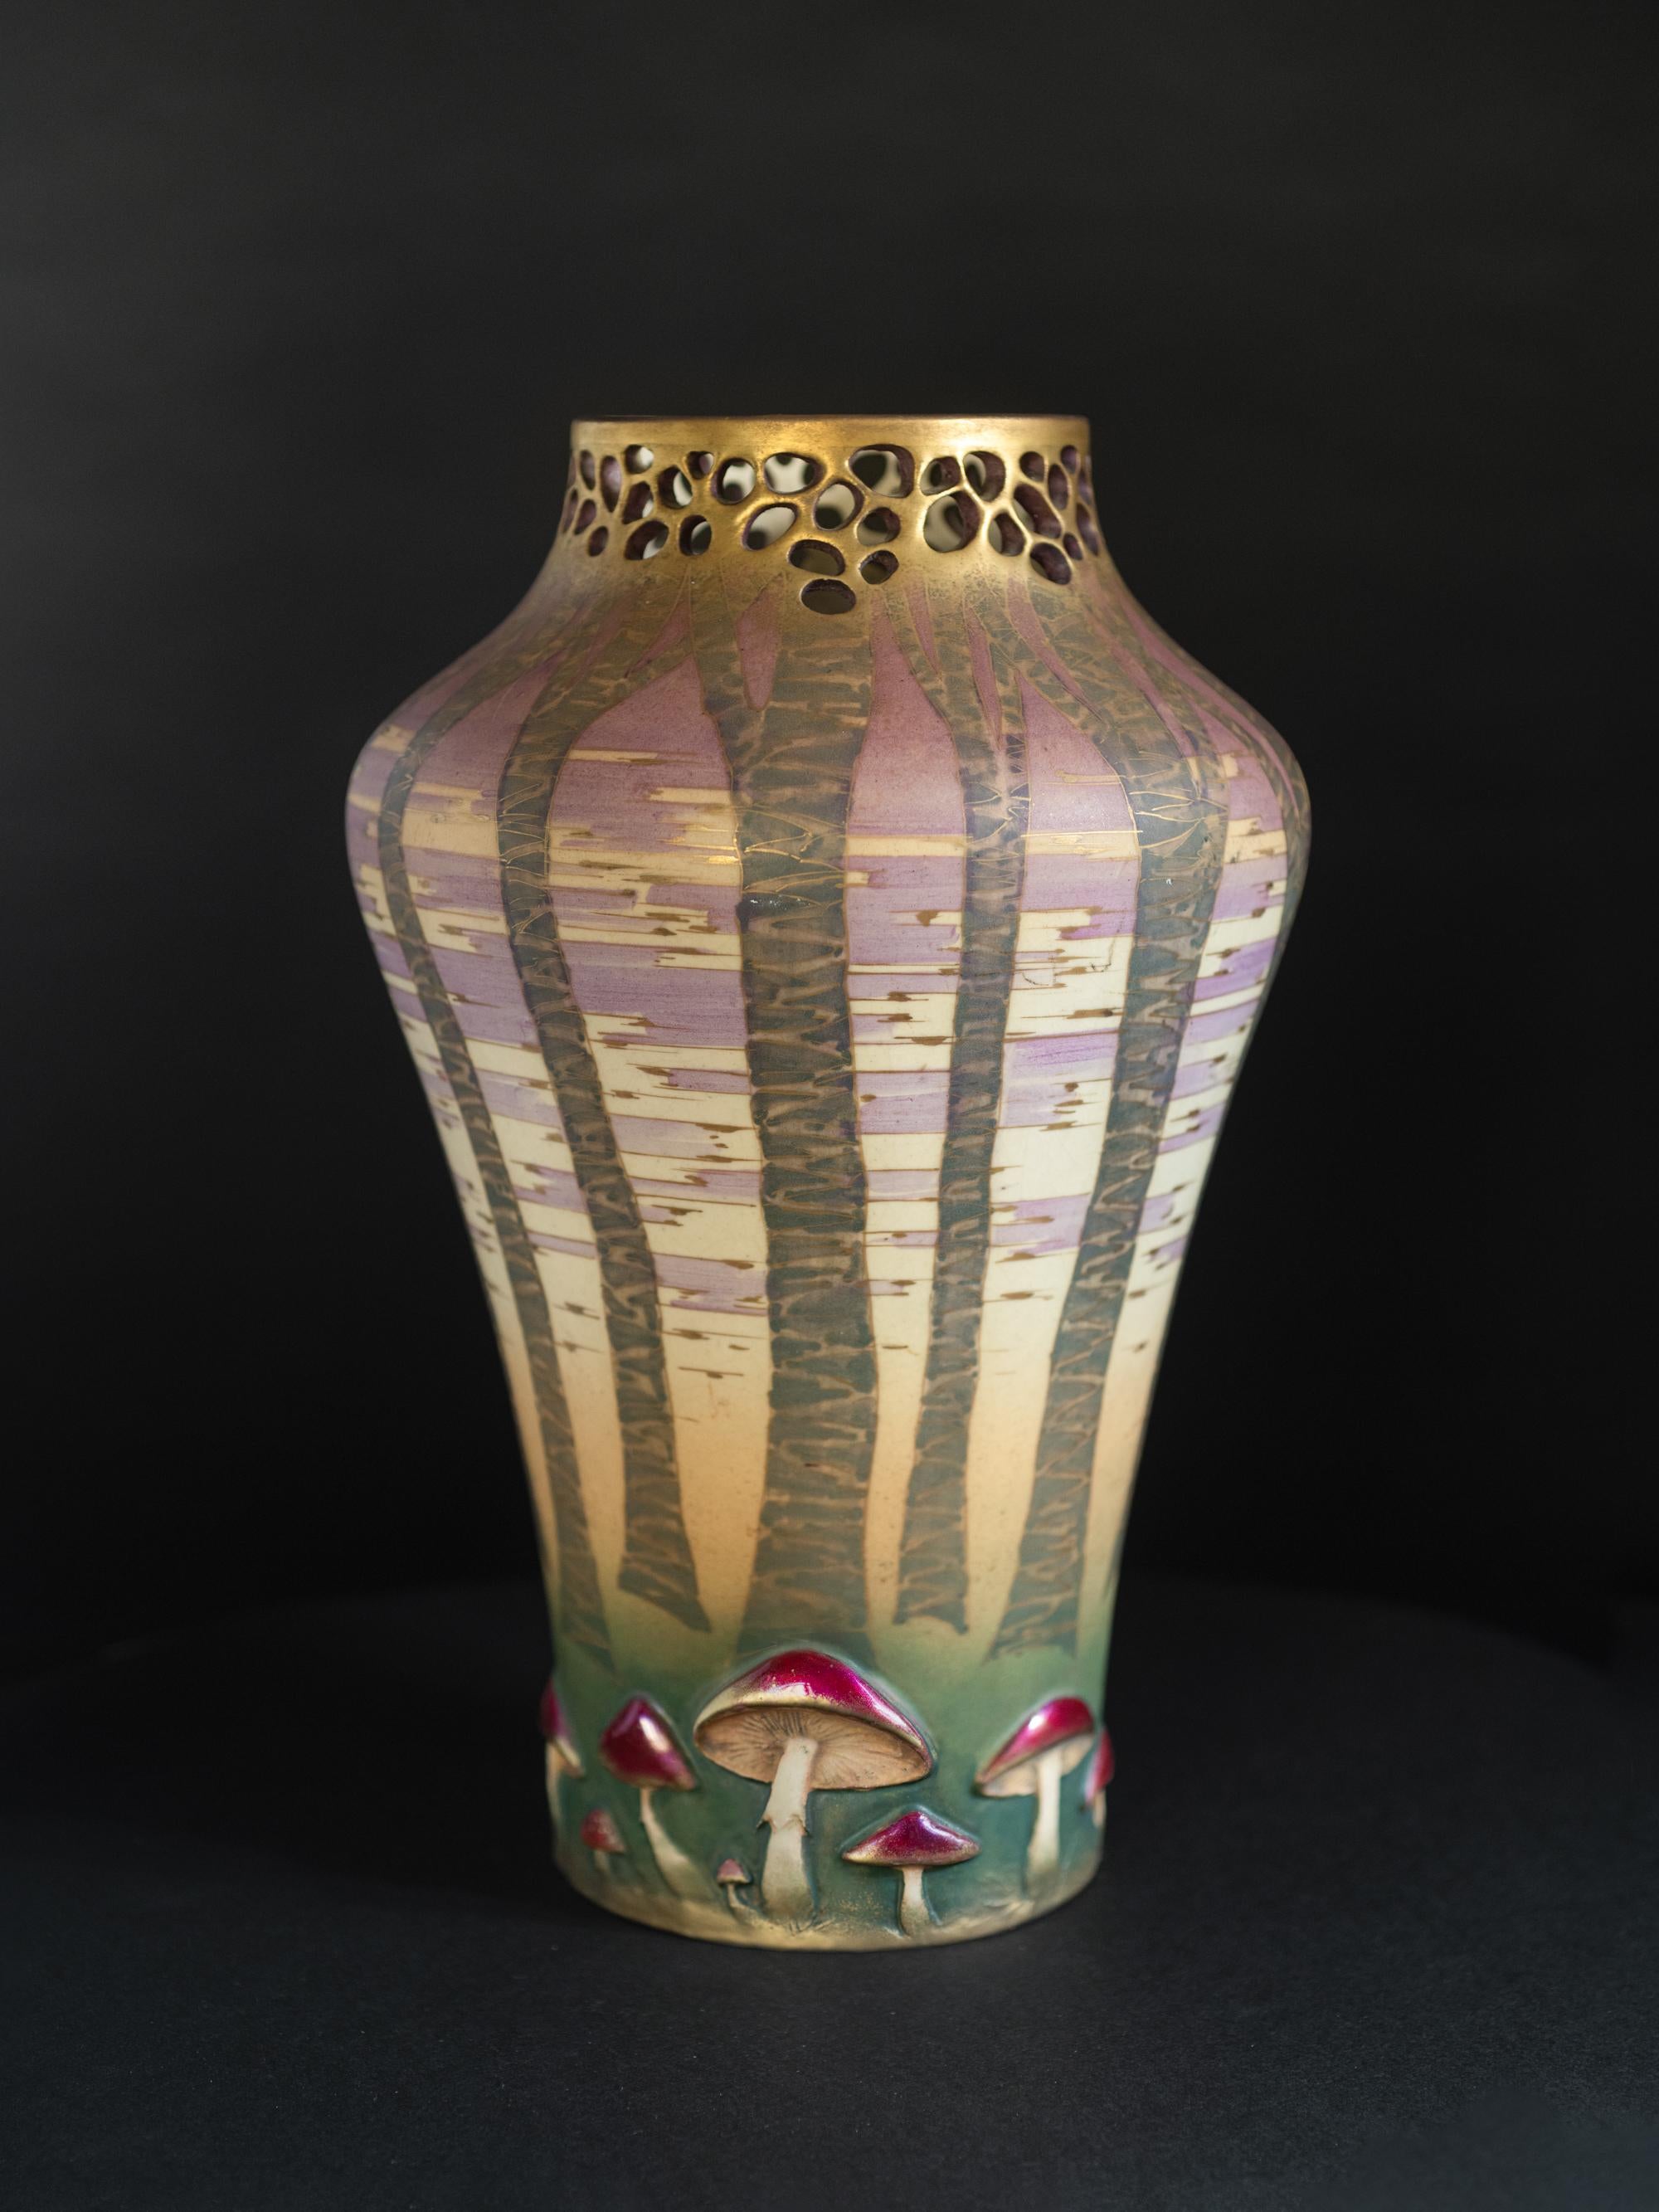 Paul Dachsel was the son-in-law of Alfred Stellmacher, the founder of Amphora Pottery company in Turn-Teplitz, then in Austria. Very little is known or was written about Dachsel. He served as a designer at Amphora from 1893 until 1905. There, he was